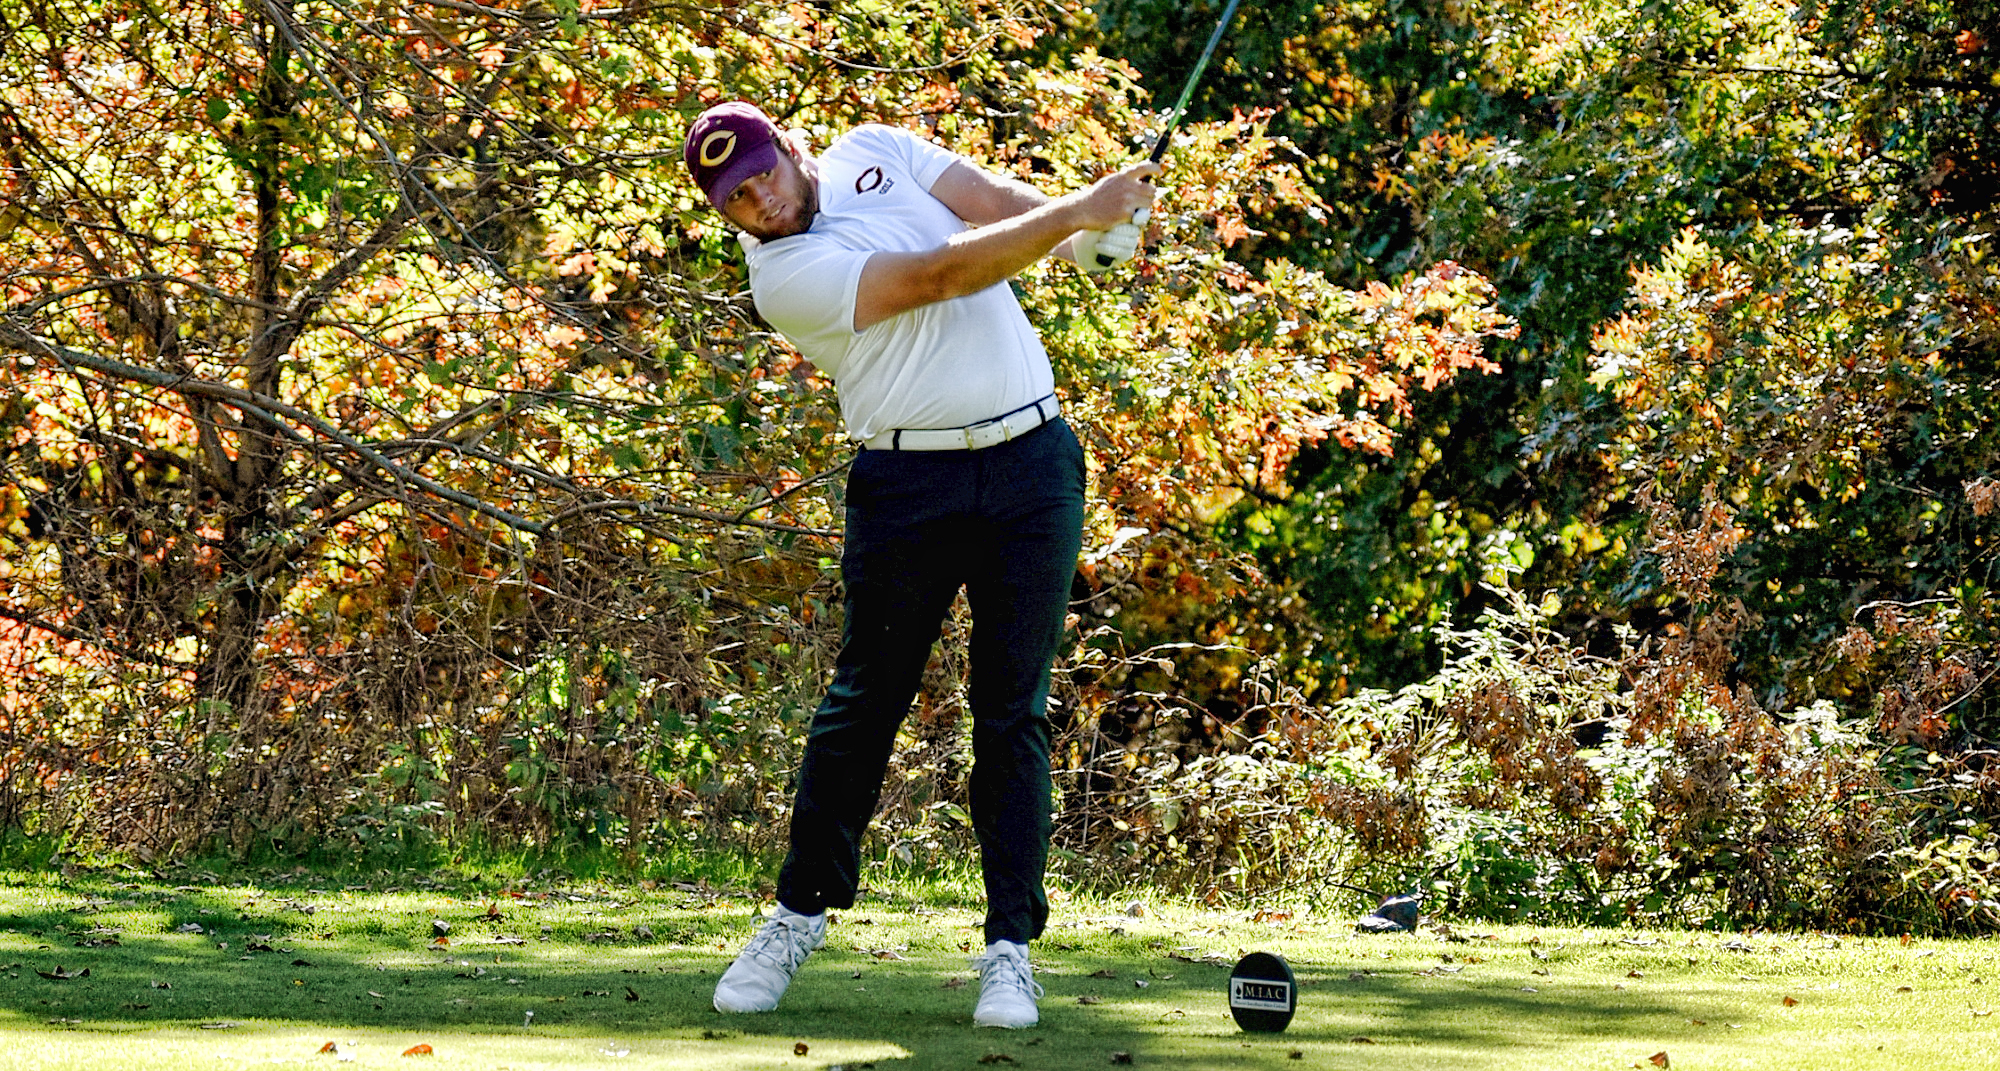 Cade Montplaisir tees off in the second round of the MIAC Championship Meet. He posted his second straight third-place finish. (Pic courtesy of Matt Higgins - MIAC Office)